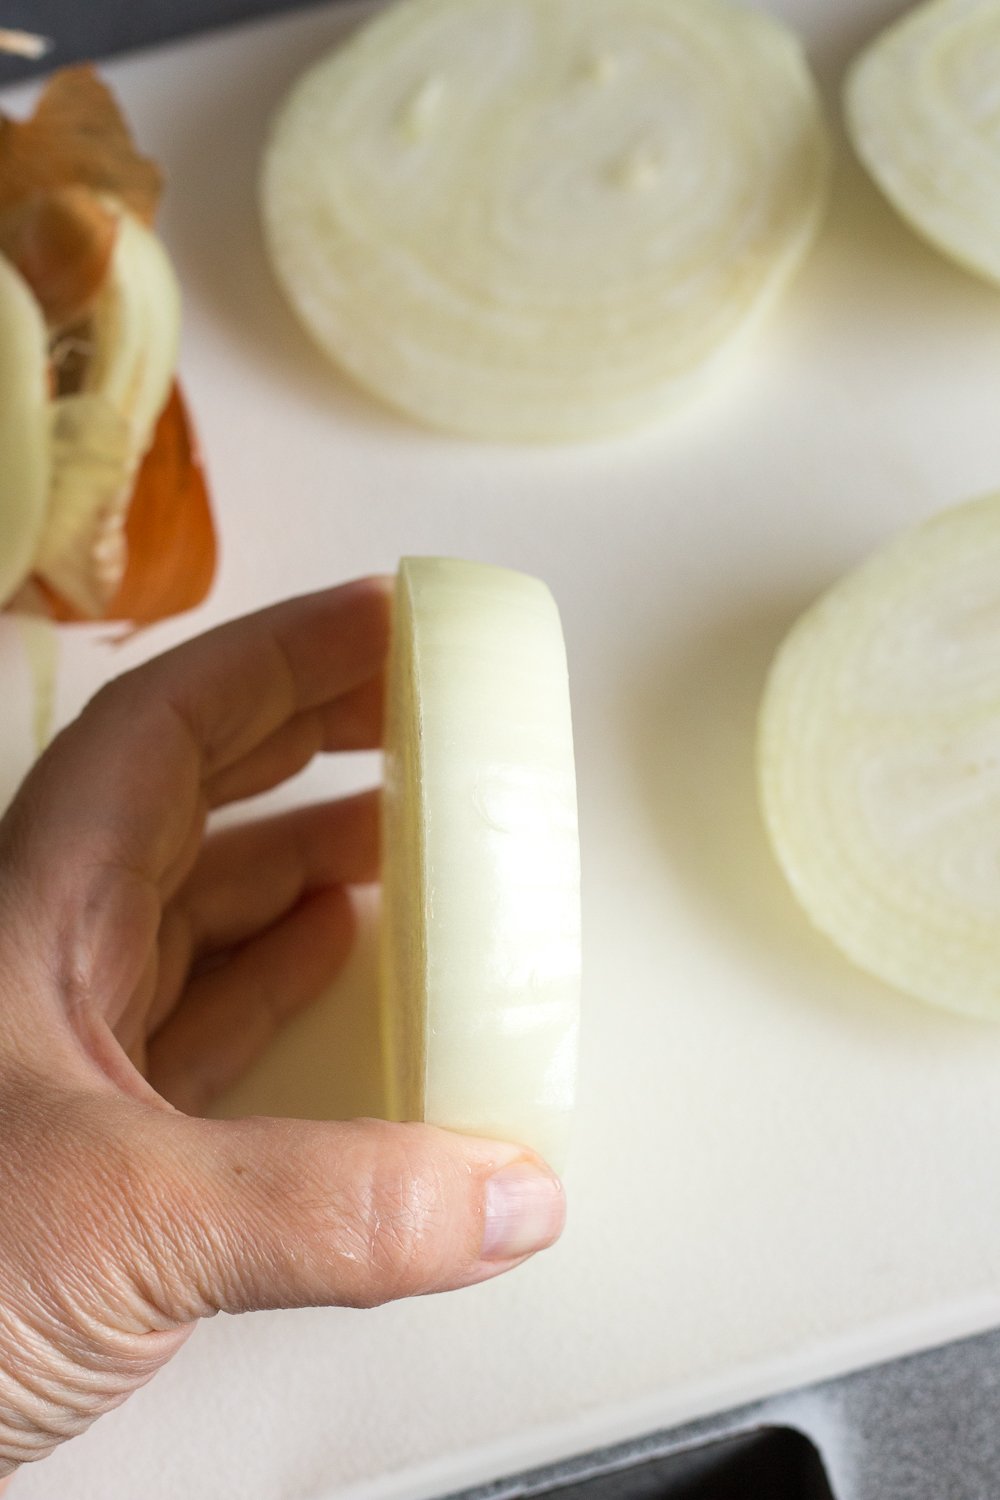 A hand holding up a large slice of an onion on a white cutting board. Other slices of onion lay on the cutting board around it.